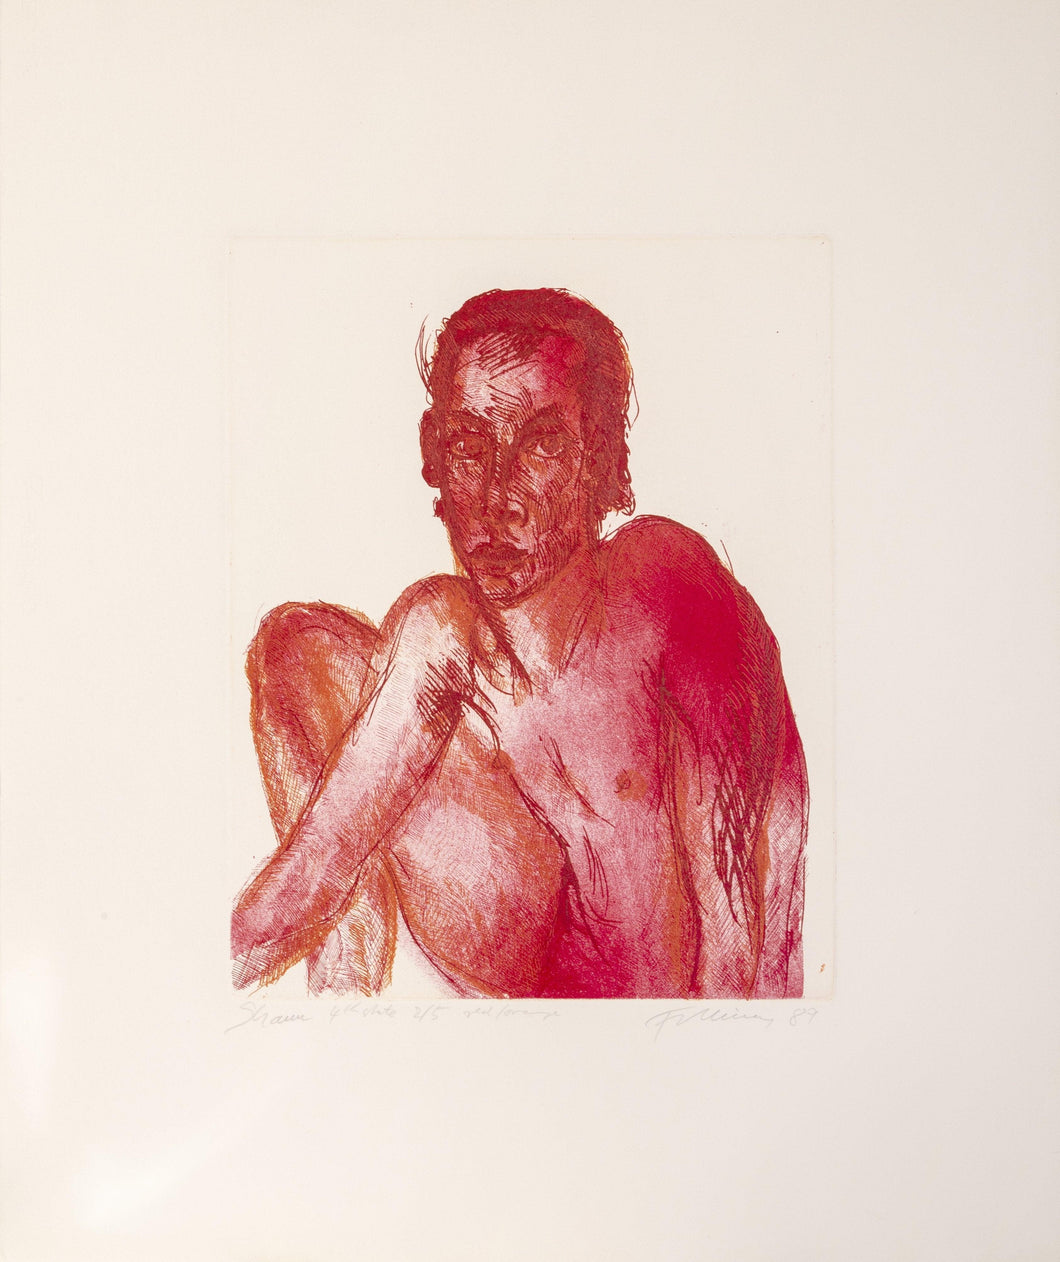 Shaun Sitting, 4th State Etching | Rainer Fetting,{{product.type}}